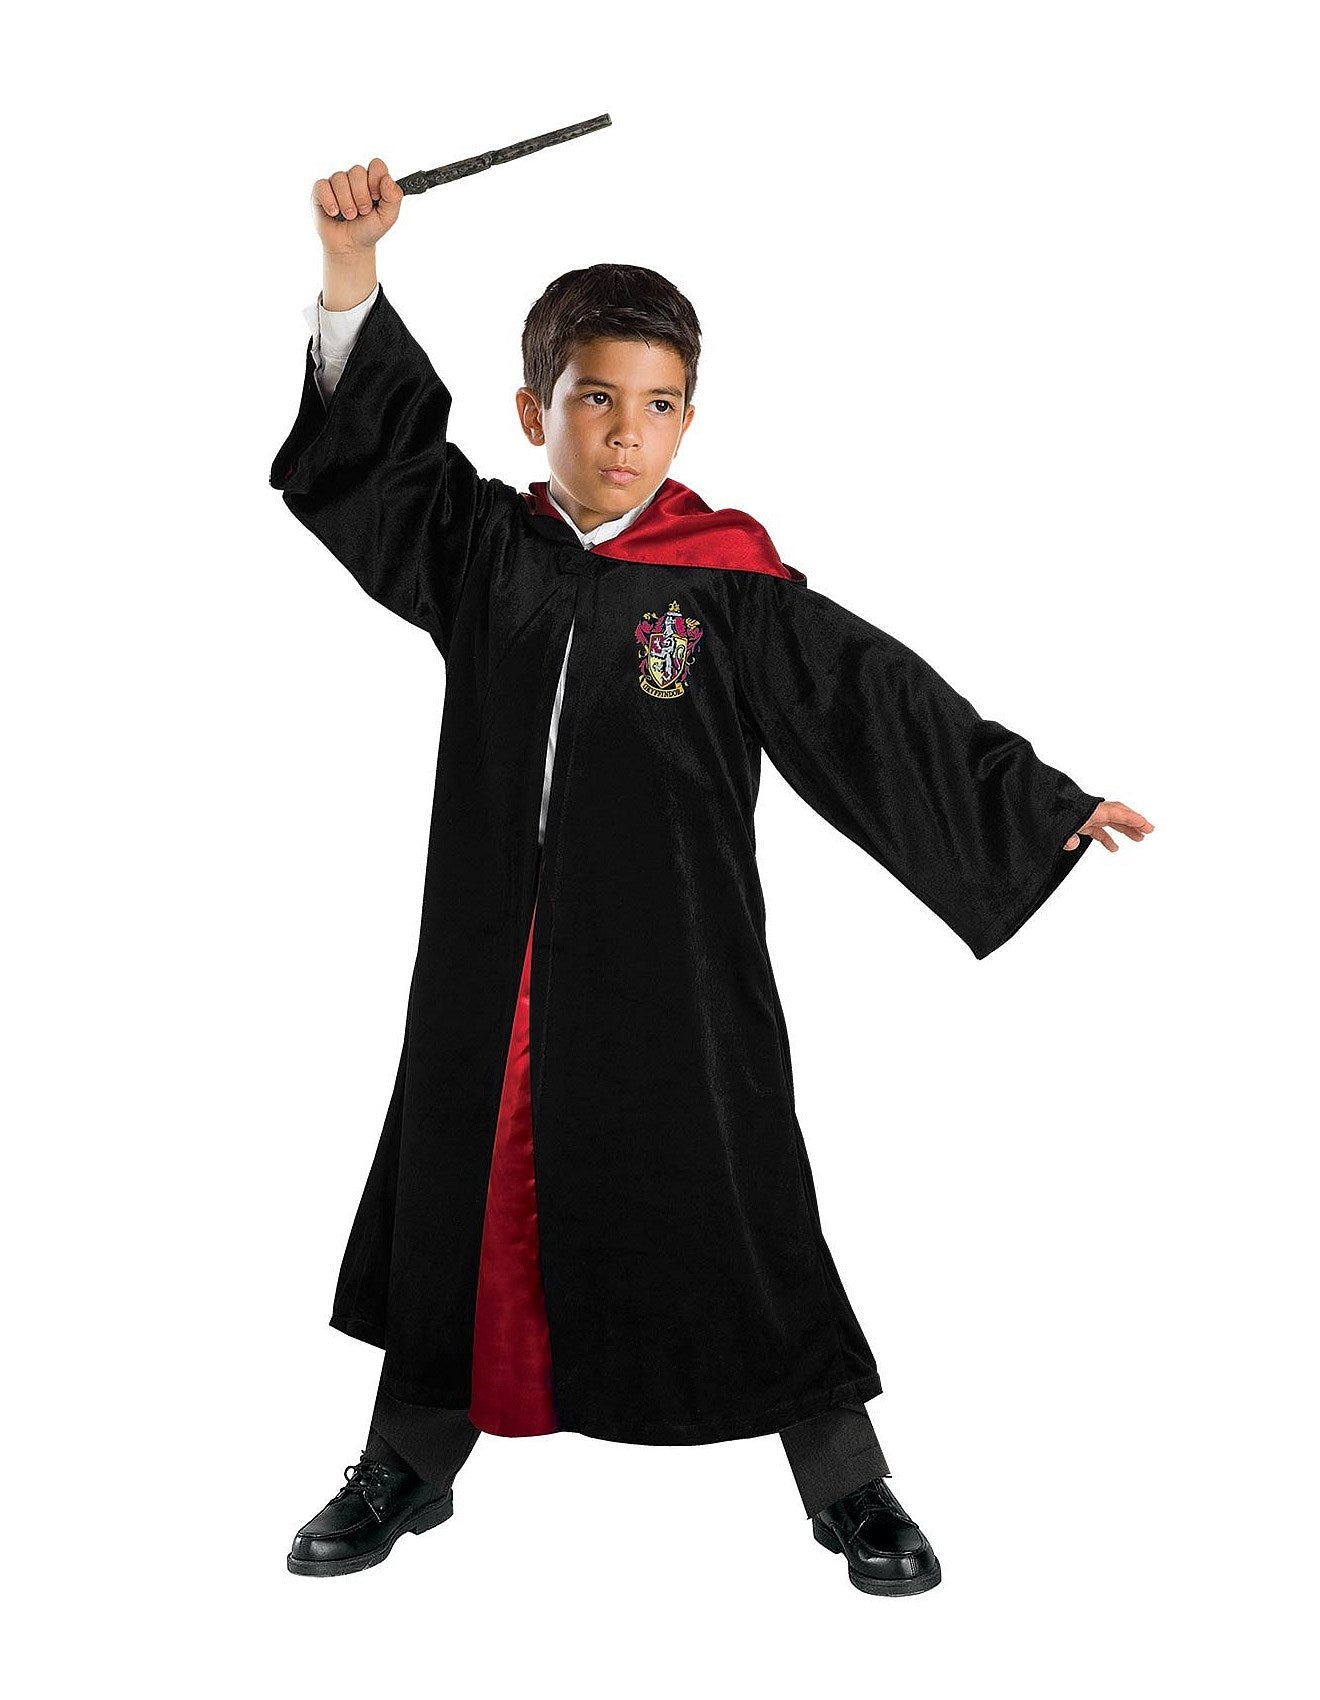 HARRY POTTER DELUXE ROBE SIZE 9+